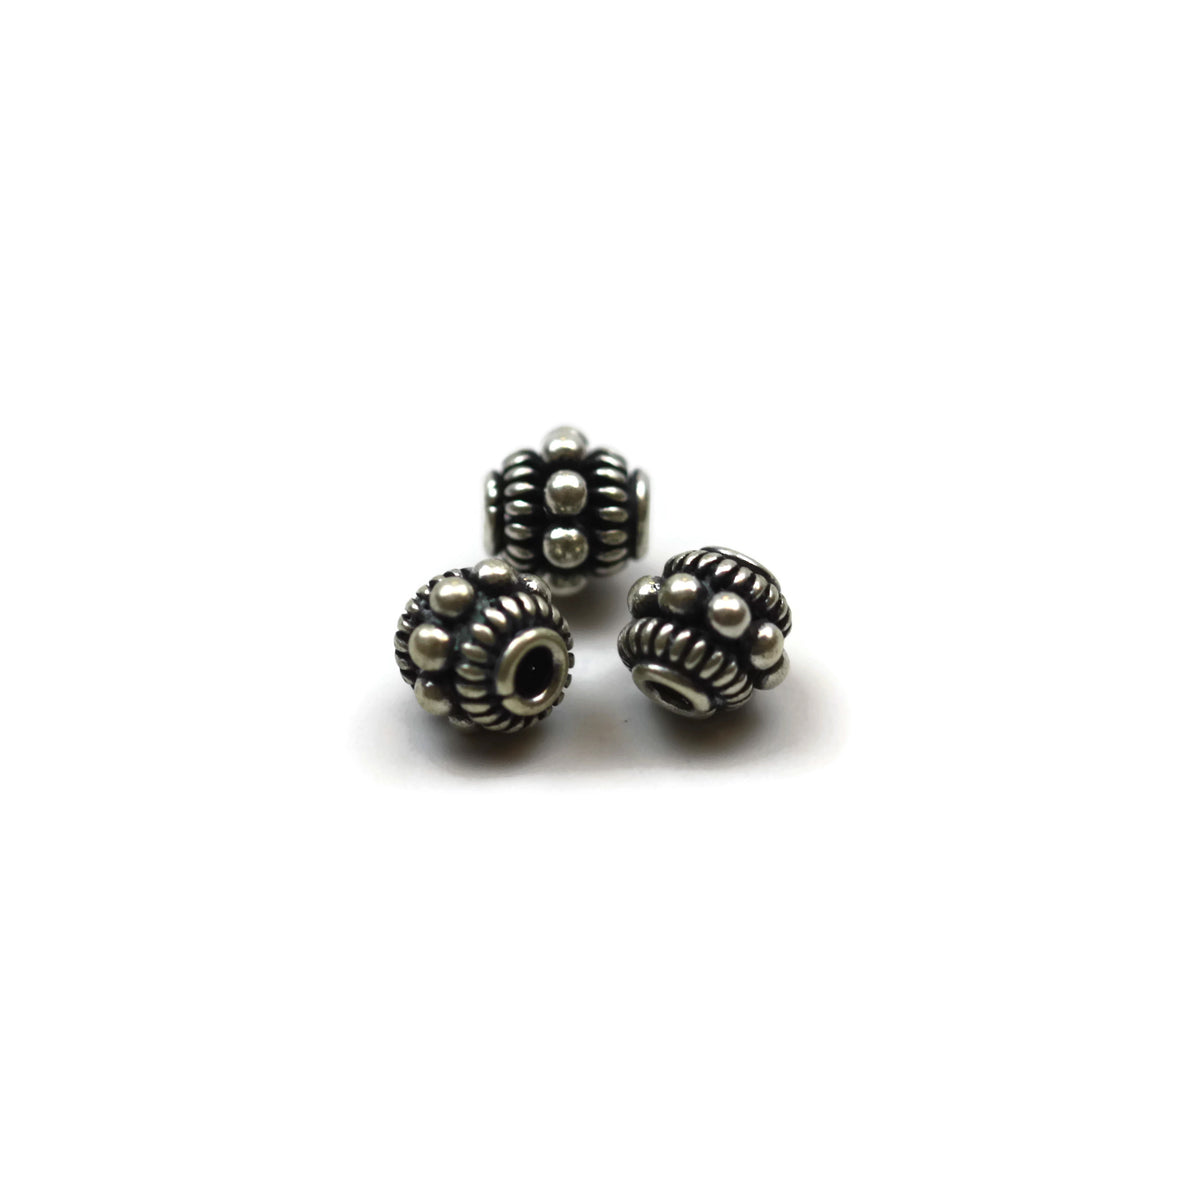 Bali Bead Sterling Silver Granules and Rope Spacer Bead 6 x 6.5 mm